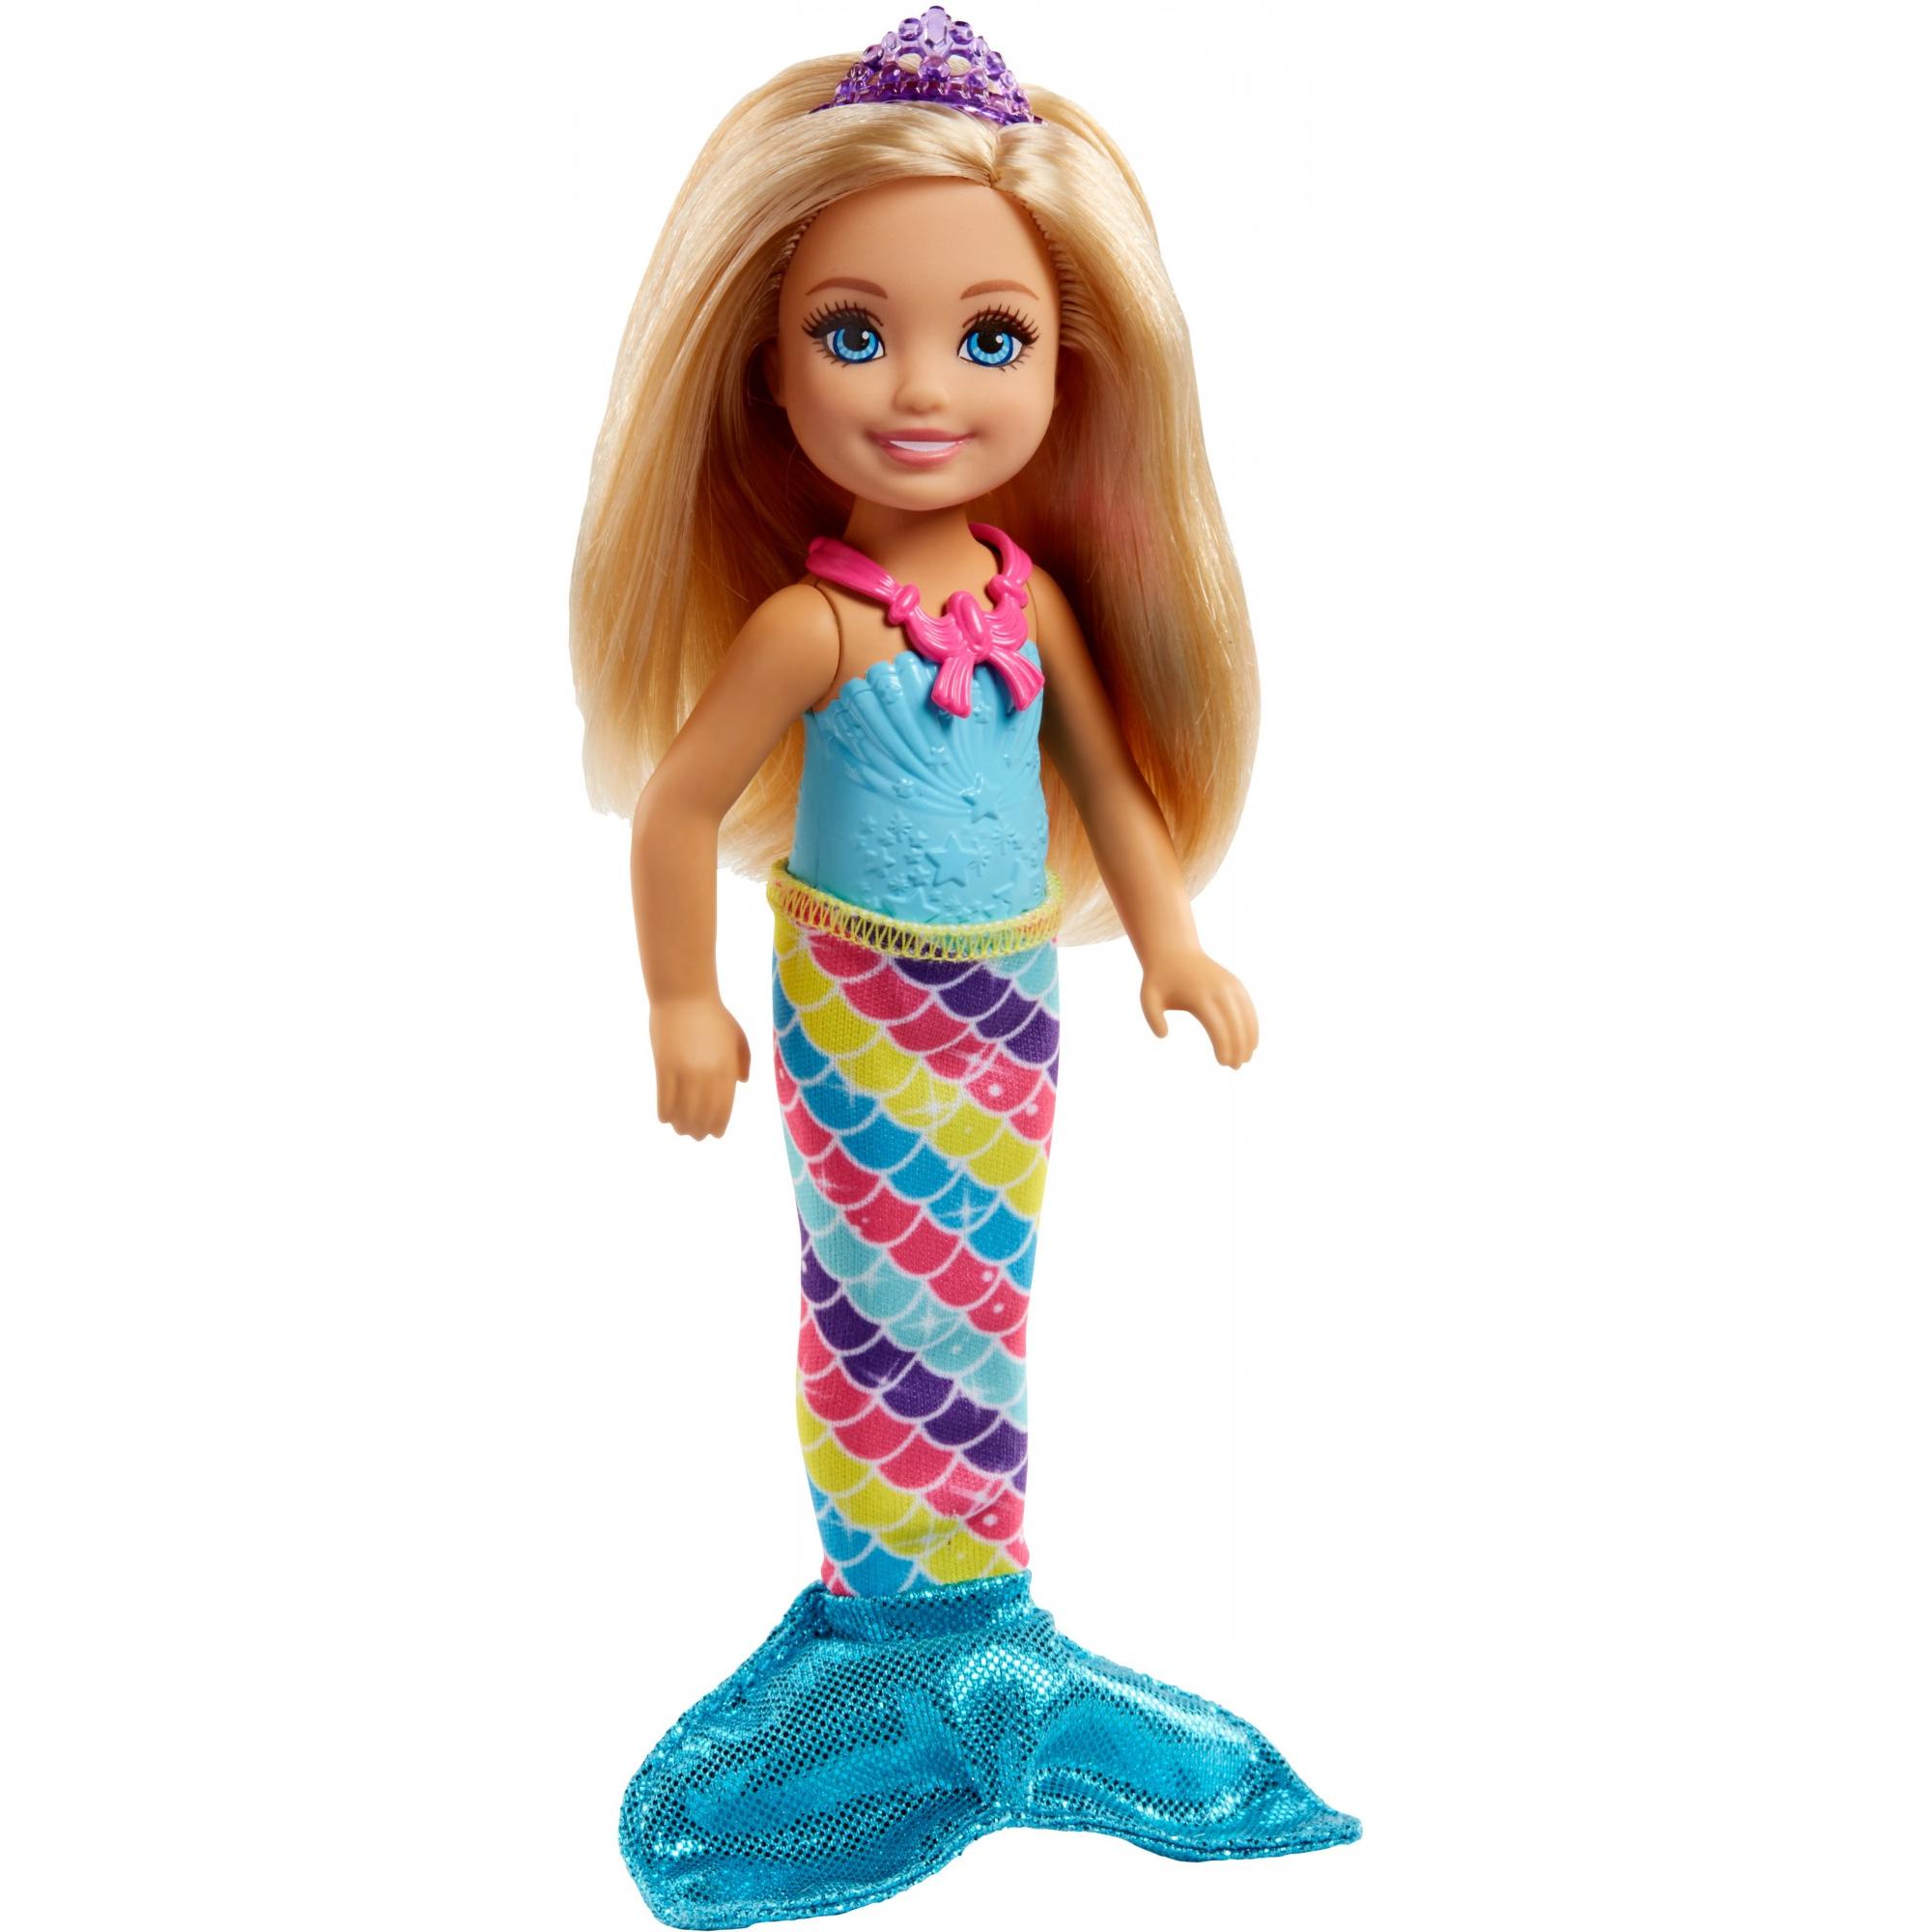 Barbie Rainbow Cove Chelsea Dress Up Doll with 3-Themed Outfits - image 4 of 9